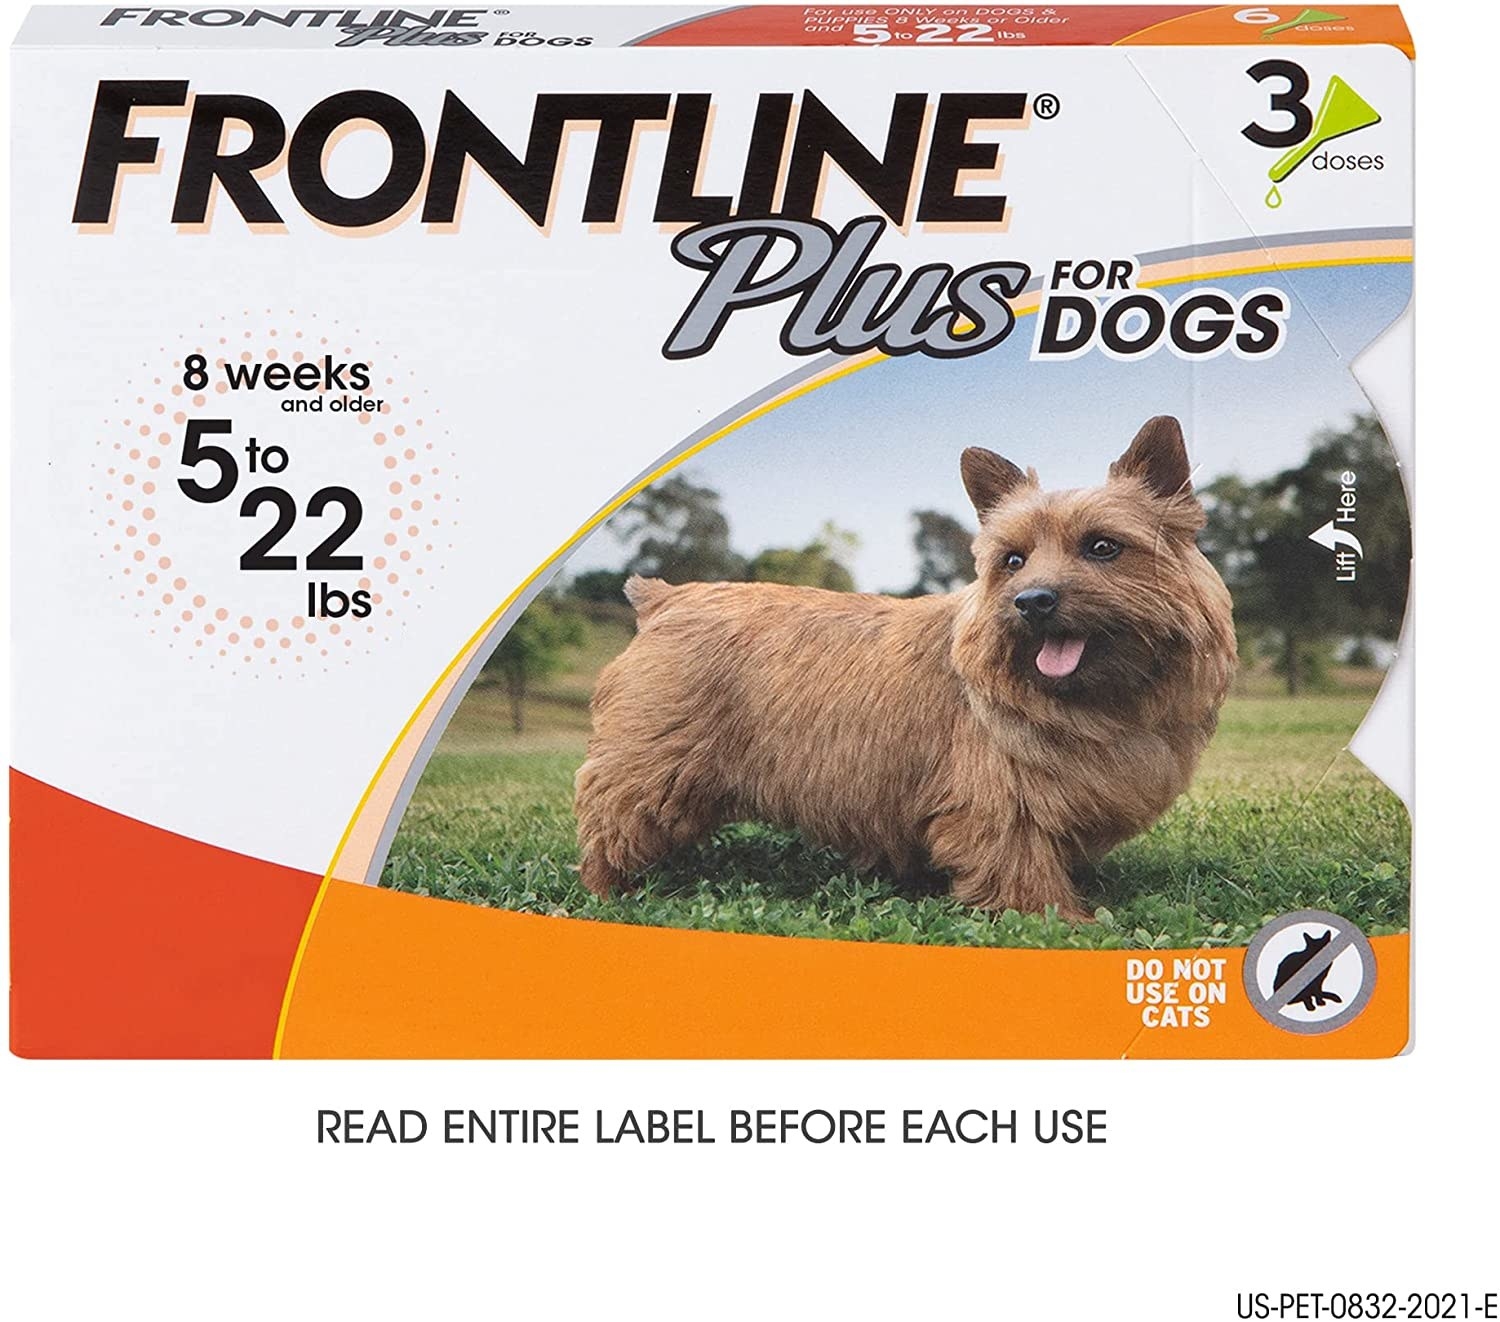 Frontline plus tick treatment for dogs